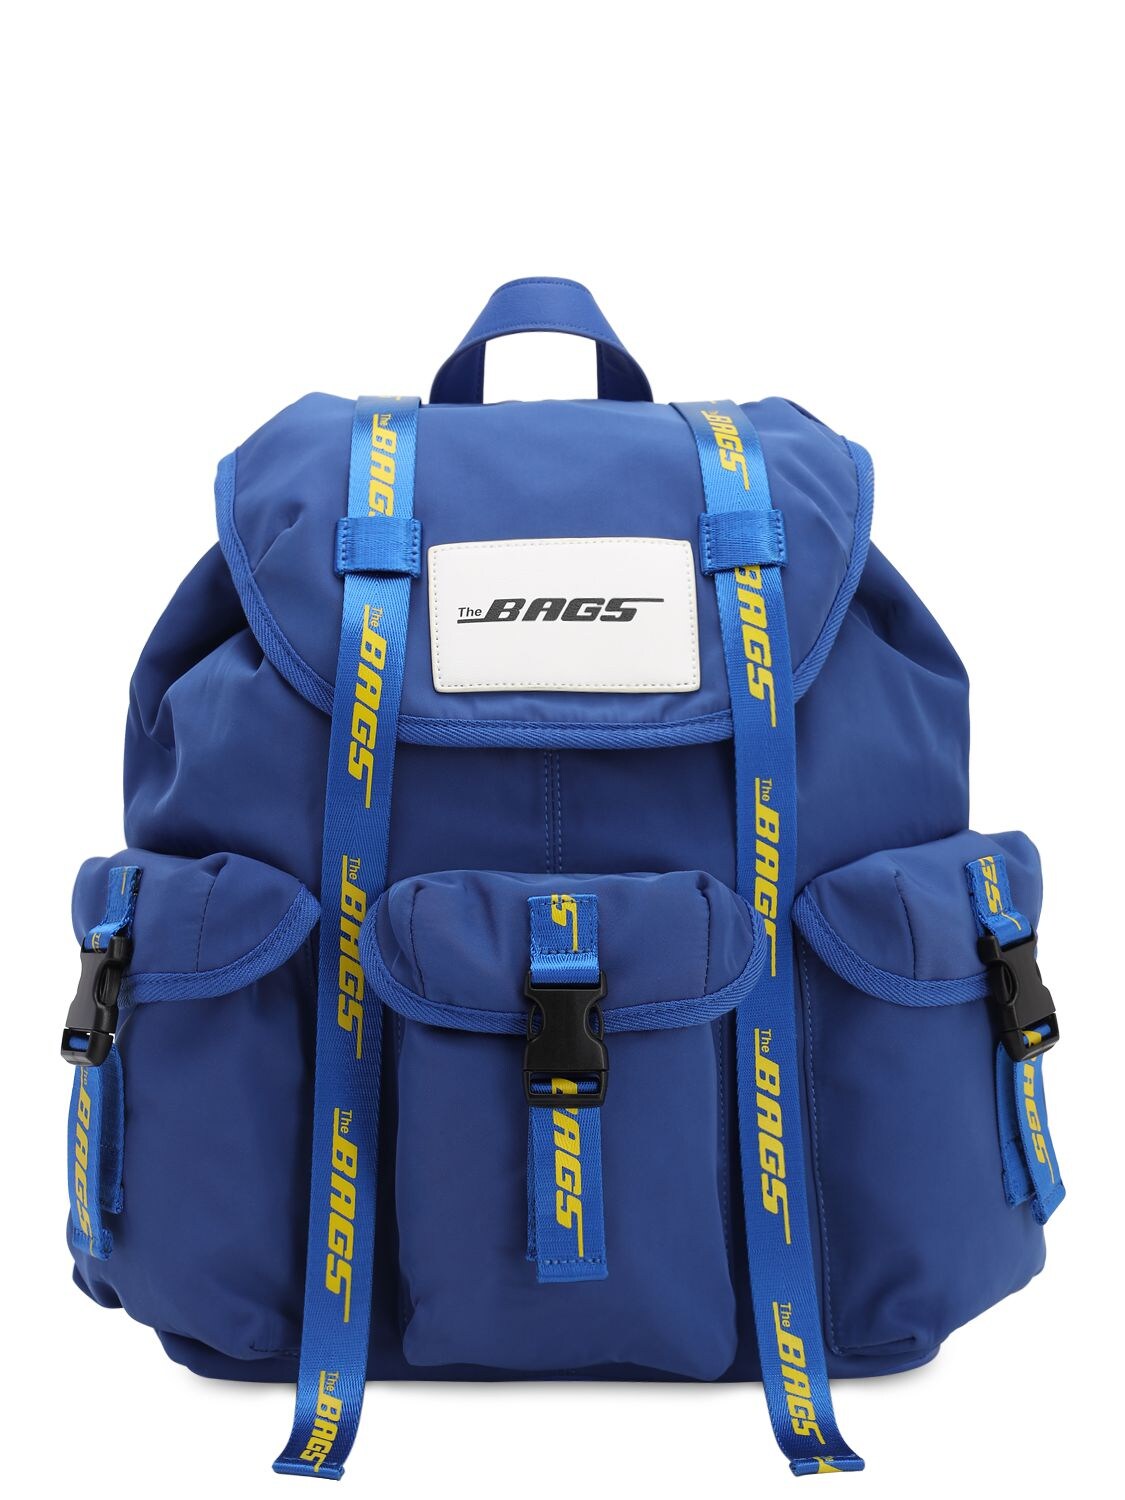 The Bags Nylon Backpack In Blue